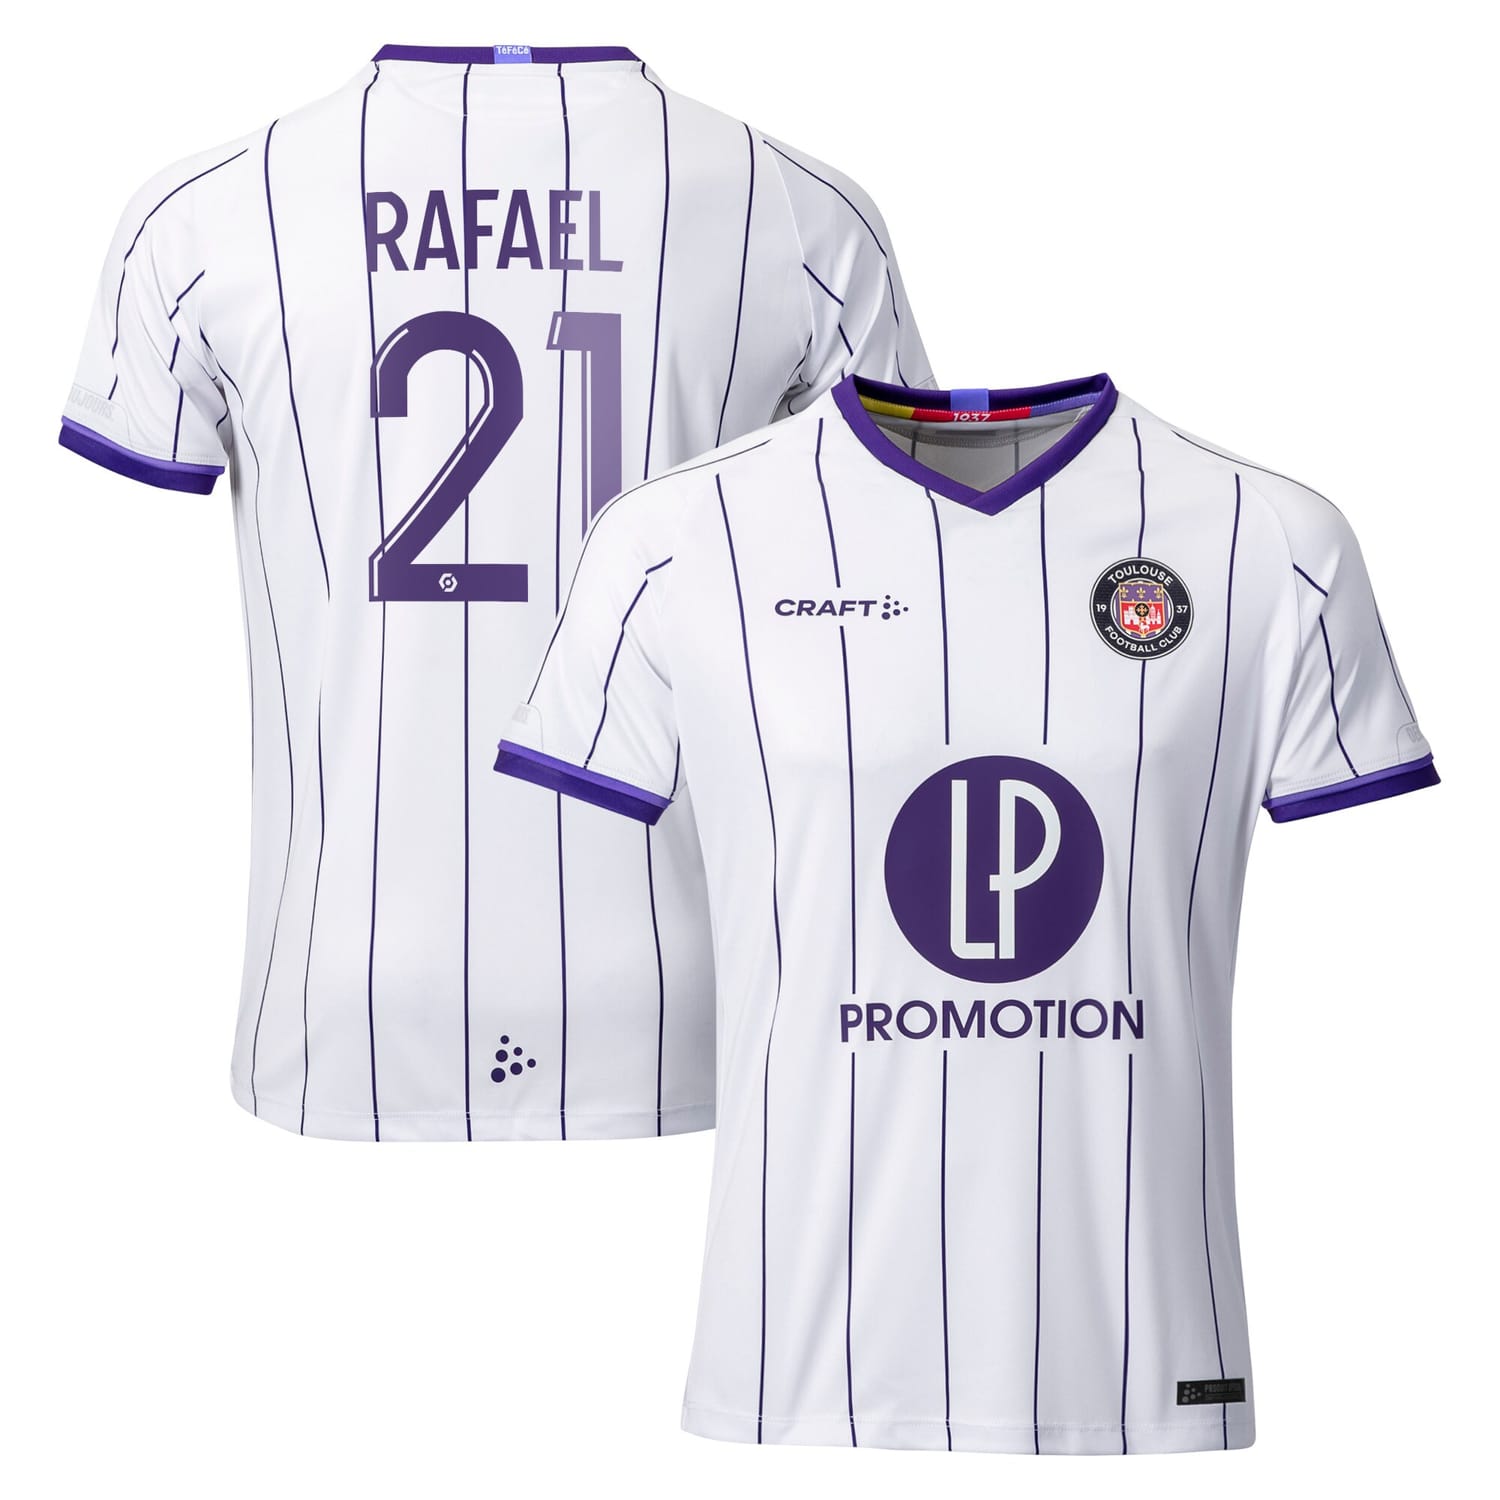 Ligue 1 Toulouse Home Jersey Shirt 2022-23 player Rafael Ratao 21 printing for Women